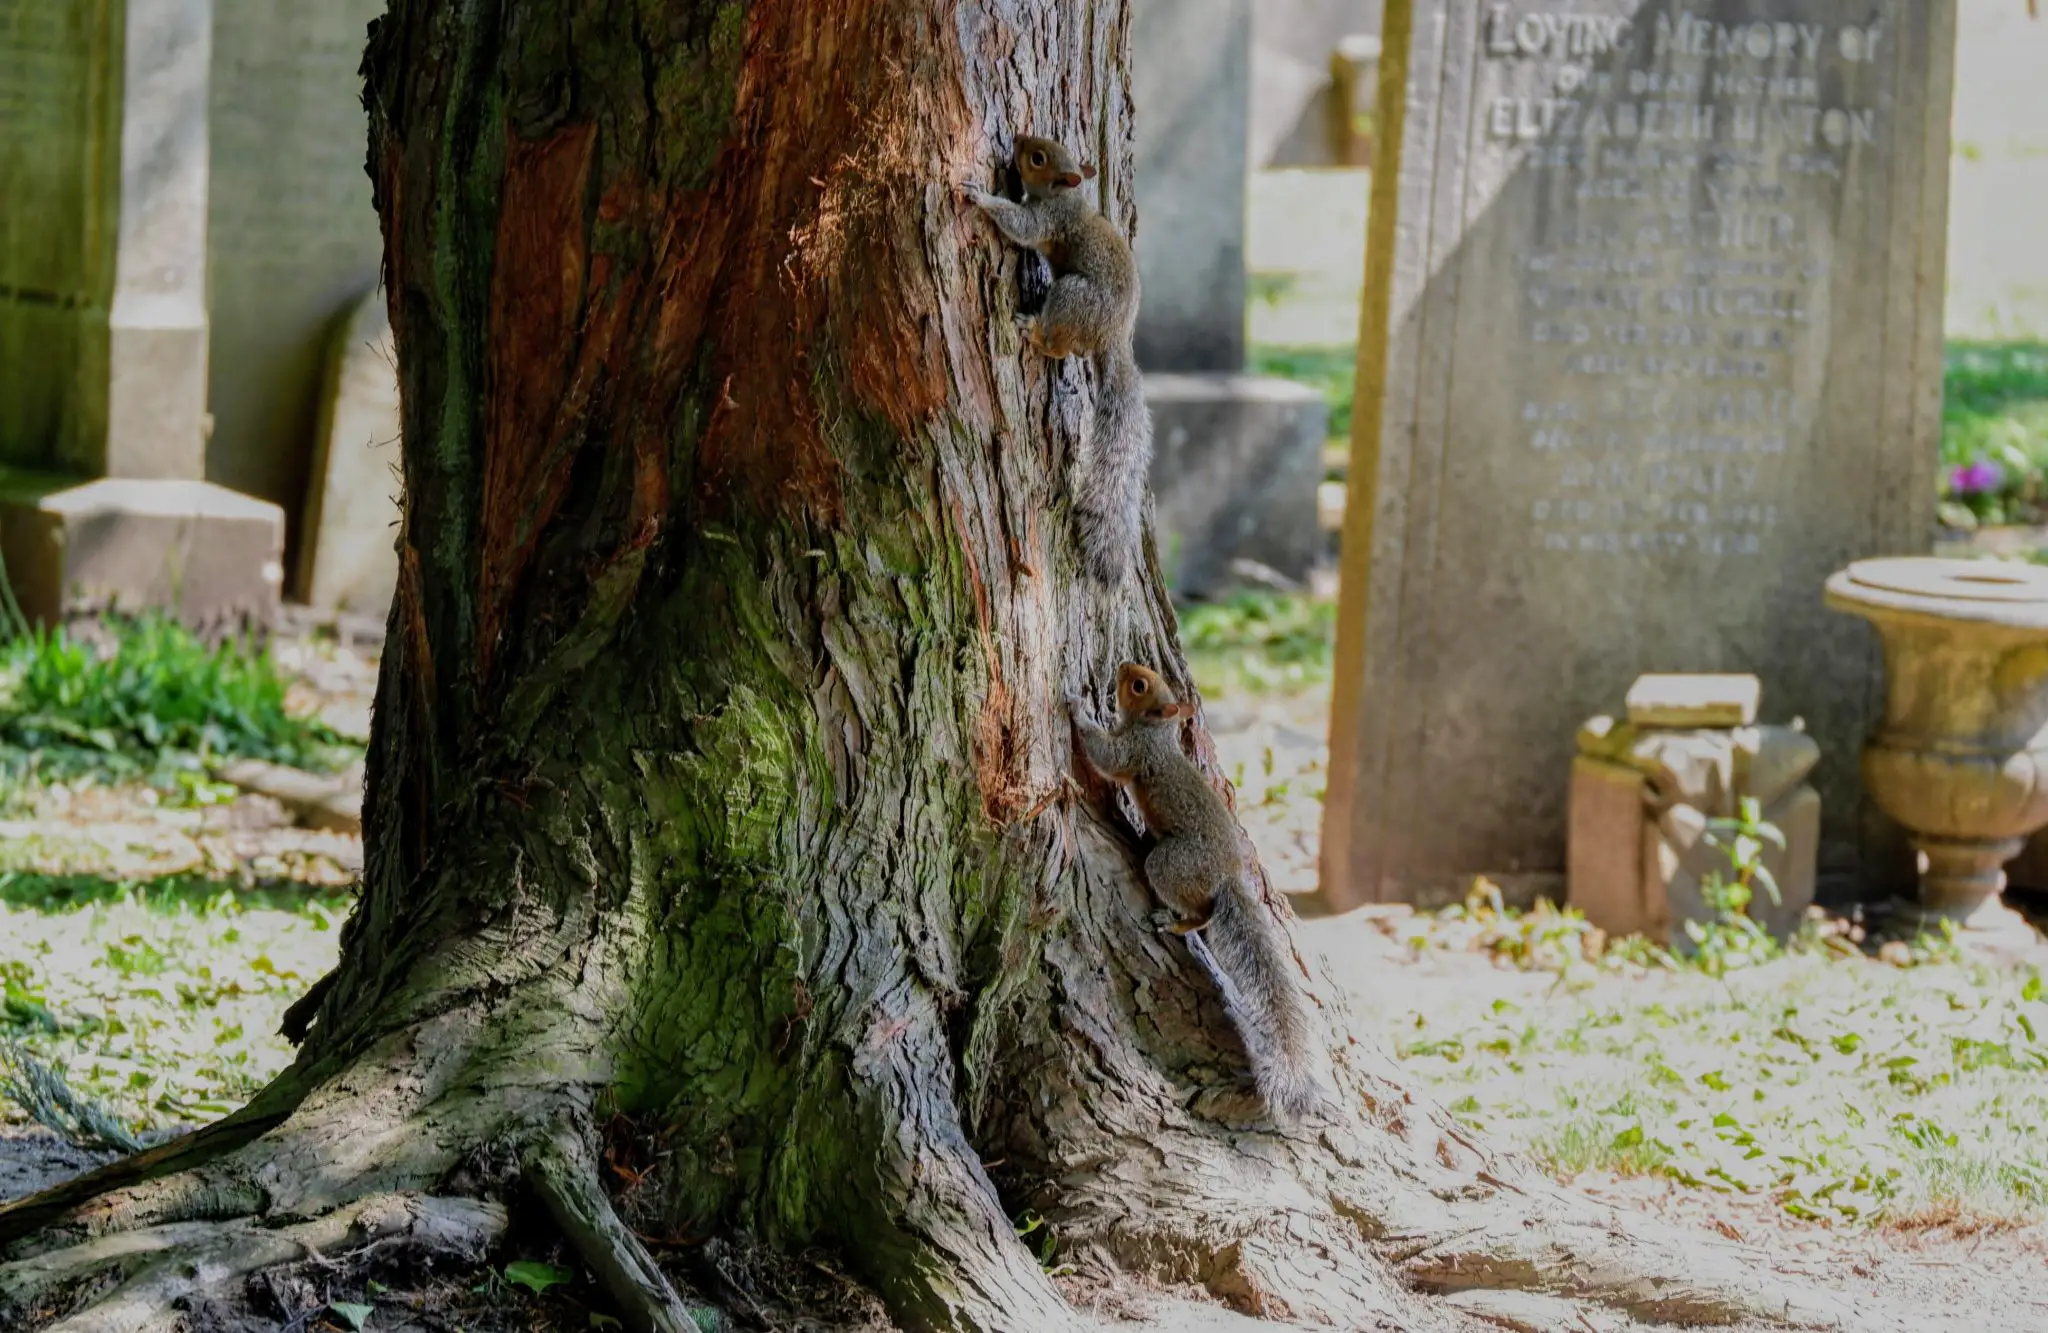 Baby squirrels in Southern Cemetery, Manchester